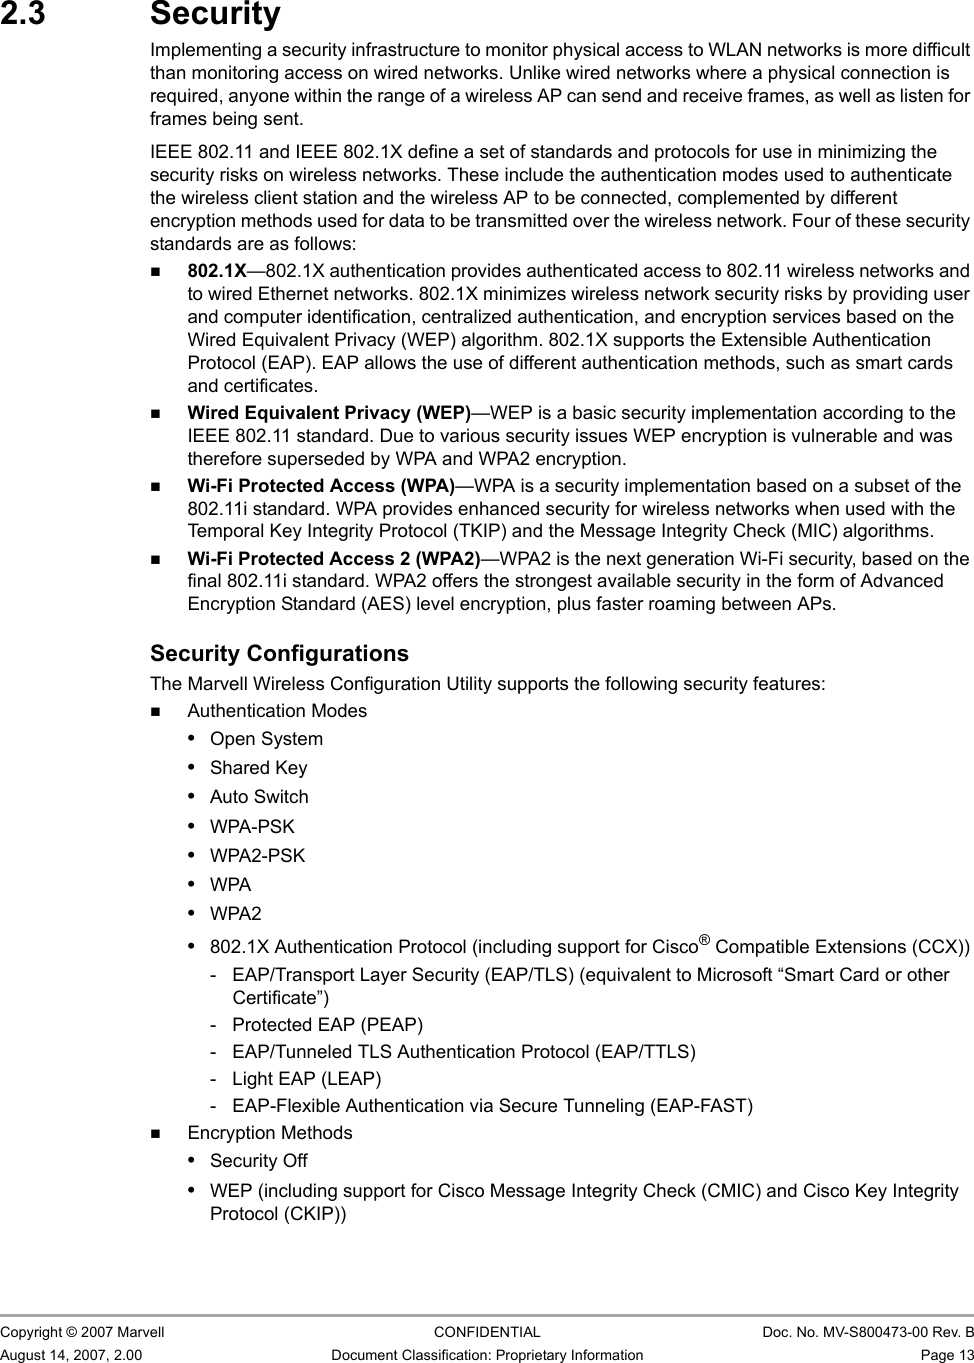 Marvell Wireless Configuration Utility OverviewSecurity                         Copyright © 2007 Marvell CONFIDENTIAL Doc. No. MV-S800473-00 Rev. BAugust 14, 2007, 2.00 Document Classification: Proprietary Information Page 13 2.3 SecurityImplementing a security infrastructure to monitor physical access to WLAN networks is more difficult than monitoring access on wired networks. Unlike wired networks where a physical connection is required, anyone within the range of a wireless AP can send and receive frames, as well as listen for frames being sent. IEEE 802.11 and IEEE 802.1X define a set of standards and protocols for use in minimizing the security risks on wireless networks. These include the authentication modes used to authenticate the wireless client station and the wireless AP to be connected, complemented by different encryption methods used for data to be transmitted over the wireless network. Four of these security standards are as follows:802.1X—802.1X authentication provides authenticated access to 802.11 wireless networks and to wired Ethernet networks. 802.1X minimizes wireless network security risks by providing user and computer identification, centralized authentication, and encryption services based on the Wired Equivalent Privacy (WEP) algorithm. 802.1X supports the Extensible Authentication Protocol (EAP). EAP allows the use of different authentication methods, such as smart cards and certificates.Wired Equivalent Privacy (WEP)—WEP is a basic security implementation according to the IEEE 802.11 standard. Due to various security issues WEP encryption is vulnerable and was therefore superseded by WPA and WPA2 encryption.Wi-Fi Protected Access (WPA)—WPA is a security implementation based on a subset of the 802.11i standard. WPA provides enhanced security for wireless networks when used with the Temporal Key Integrity Protocol (TKIP) and the Message Integrity Check (MIC) algorithms.Wi-Fi Protected Access 2 (WPA2)—WPA2 is the next generation Wi-Fi security, based on the final 802.11i standard. WPA2 offers the strongest available security in the form of Advanced Encryption Standard (AES) level encryption, plus faster roaming between APs.Security ConfigurationsThe Marvell Wireless Configuration Utility supports the following security features:Authentication Modes•Open System•Shared Key•Auto Switch•WPA-PSK•WPA2-PSK•WPA•WPA2•802.1X Authentication Protocol (including support for Cisco® Compatible Extensions (CCX))-  EAP/Transport Layer Security (EAP/TLS) (equivalent to Microsoft “Smart Card or other Certificate”)-  Protected EAP (PEAP)-  EAP/Tunneled TLS Authentication Protocol (EAP/TTLS)- Light EAP (LEAP)- EAP-Flexible Authentication via Secure Tunneling (EAP-FAST)Encryption Methods•Security Off•WEP (including support for Cisco Message Integrity Check (CMIC) and Cisco Key Integrity Protocol (CKIP))